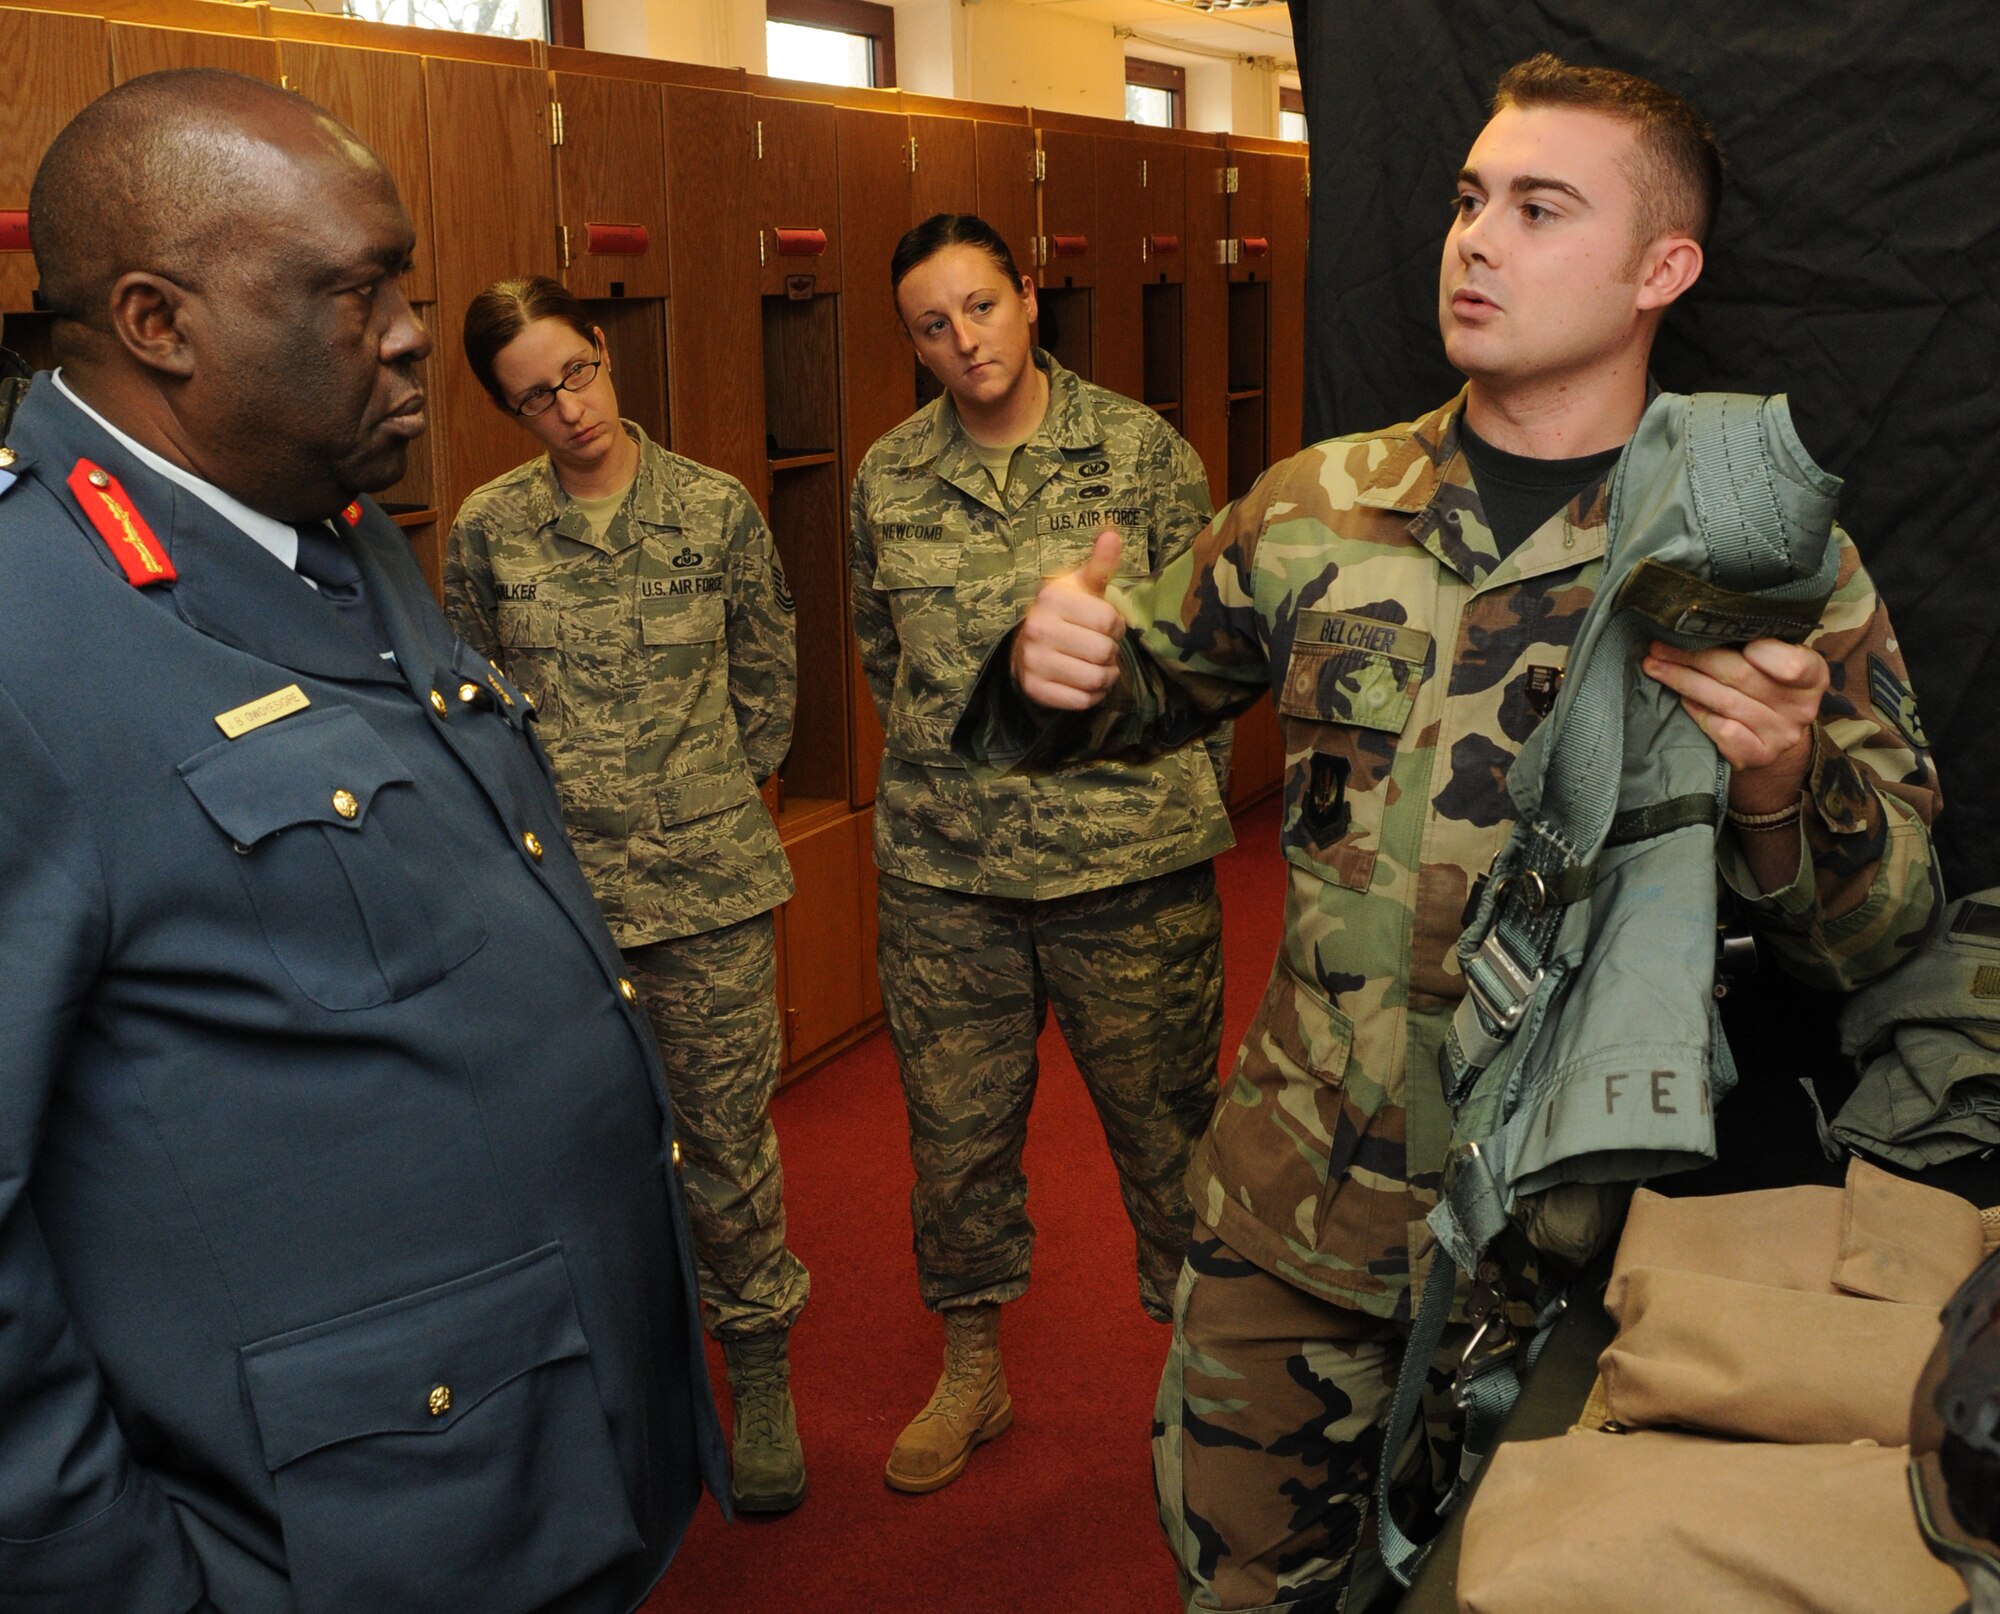 SPANGDAHLEM AIR BASE, Germany – Senior Airman Mark Belcher, right, 52nd Operations Support Squadron aircrew flight equipment journeyman, explains the purpose of life support equipment worn by pilots to Maj. Gen. Jim Beesigye Owoyesigire, Ugandan Peoples Defense Air Force commander, during his visit Nov. 10. General Owoyesigire toured several squadrons on Spangdahlem Air Base to gain a greater understanding of how the U.S. Air Force operates. (U.S. Air Force photo/Staff Sgt. Benjamin Wilson)